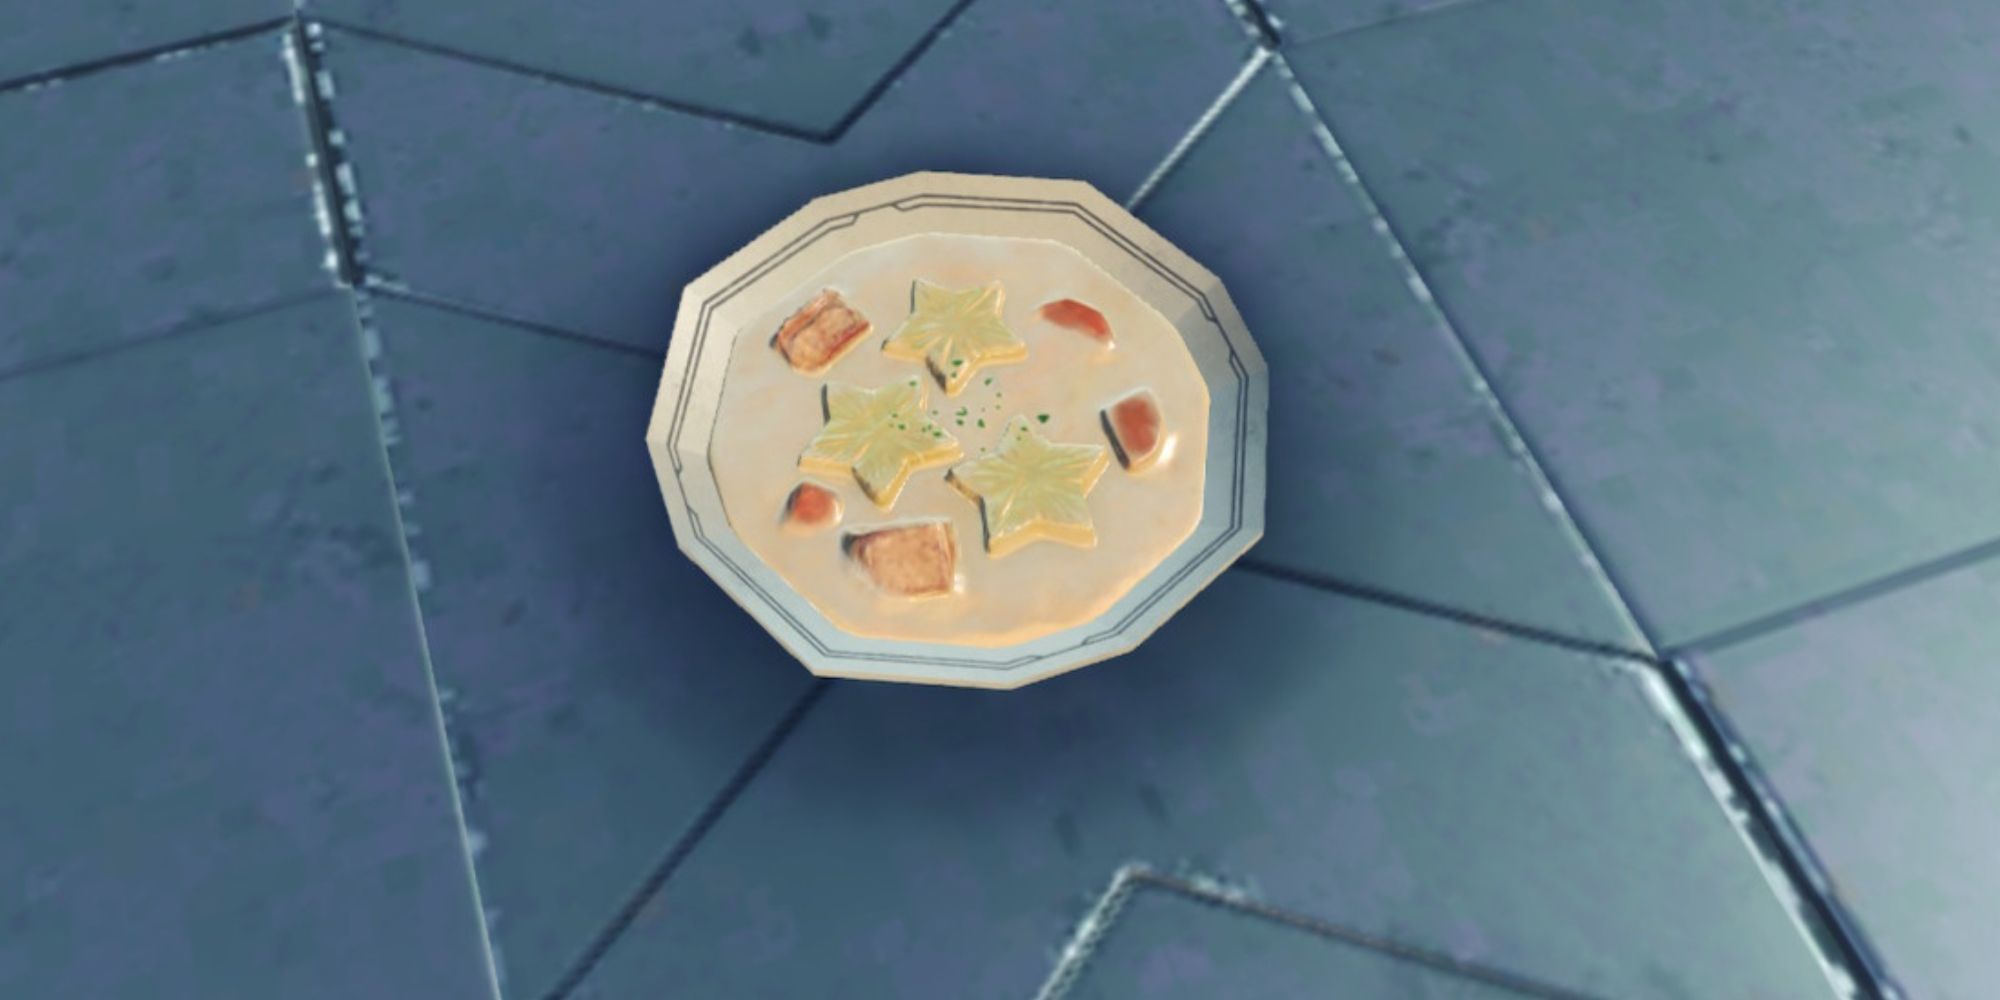 Manana's Battle Soup Meal in Xenoblade Chronicles 3